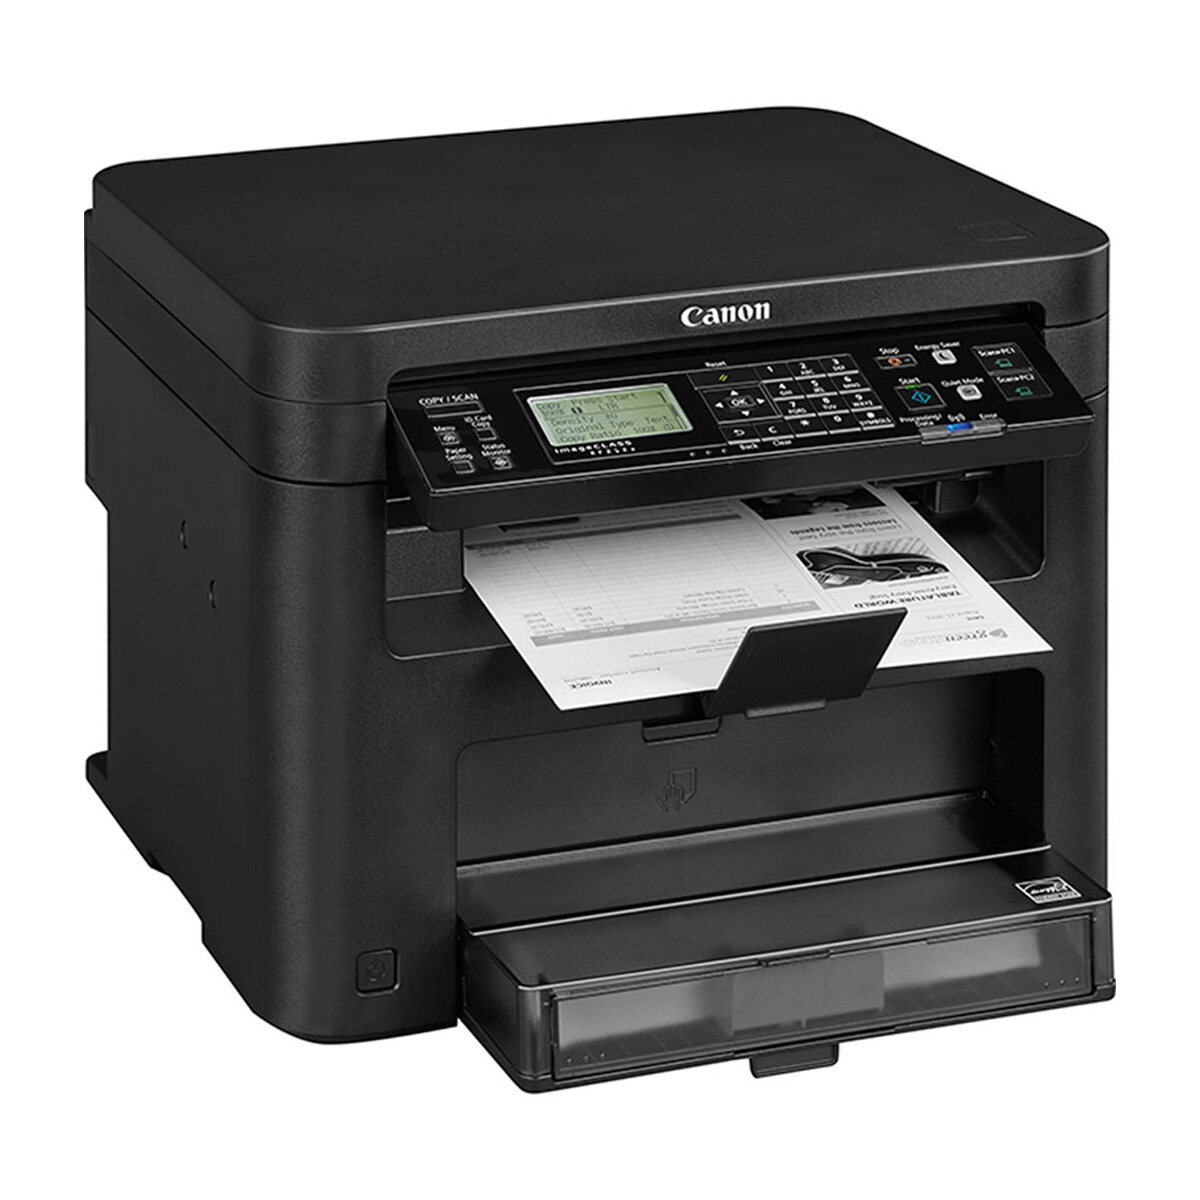 Canon imageCLASS MF241d Compact All-in-One Mono Printer (Print, Copy, Scan) with duplex,  Print, Scan, Copy